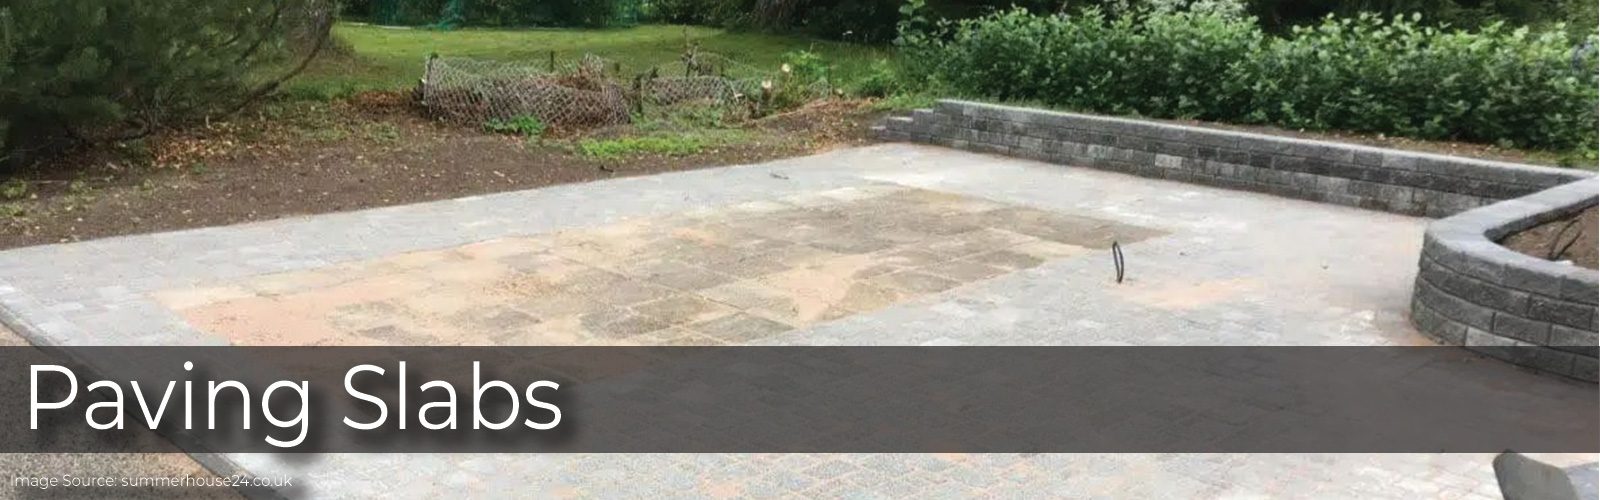 Compare-Garden-Rooms-Paving-Slabs